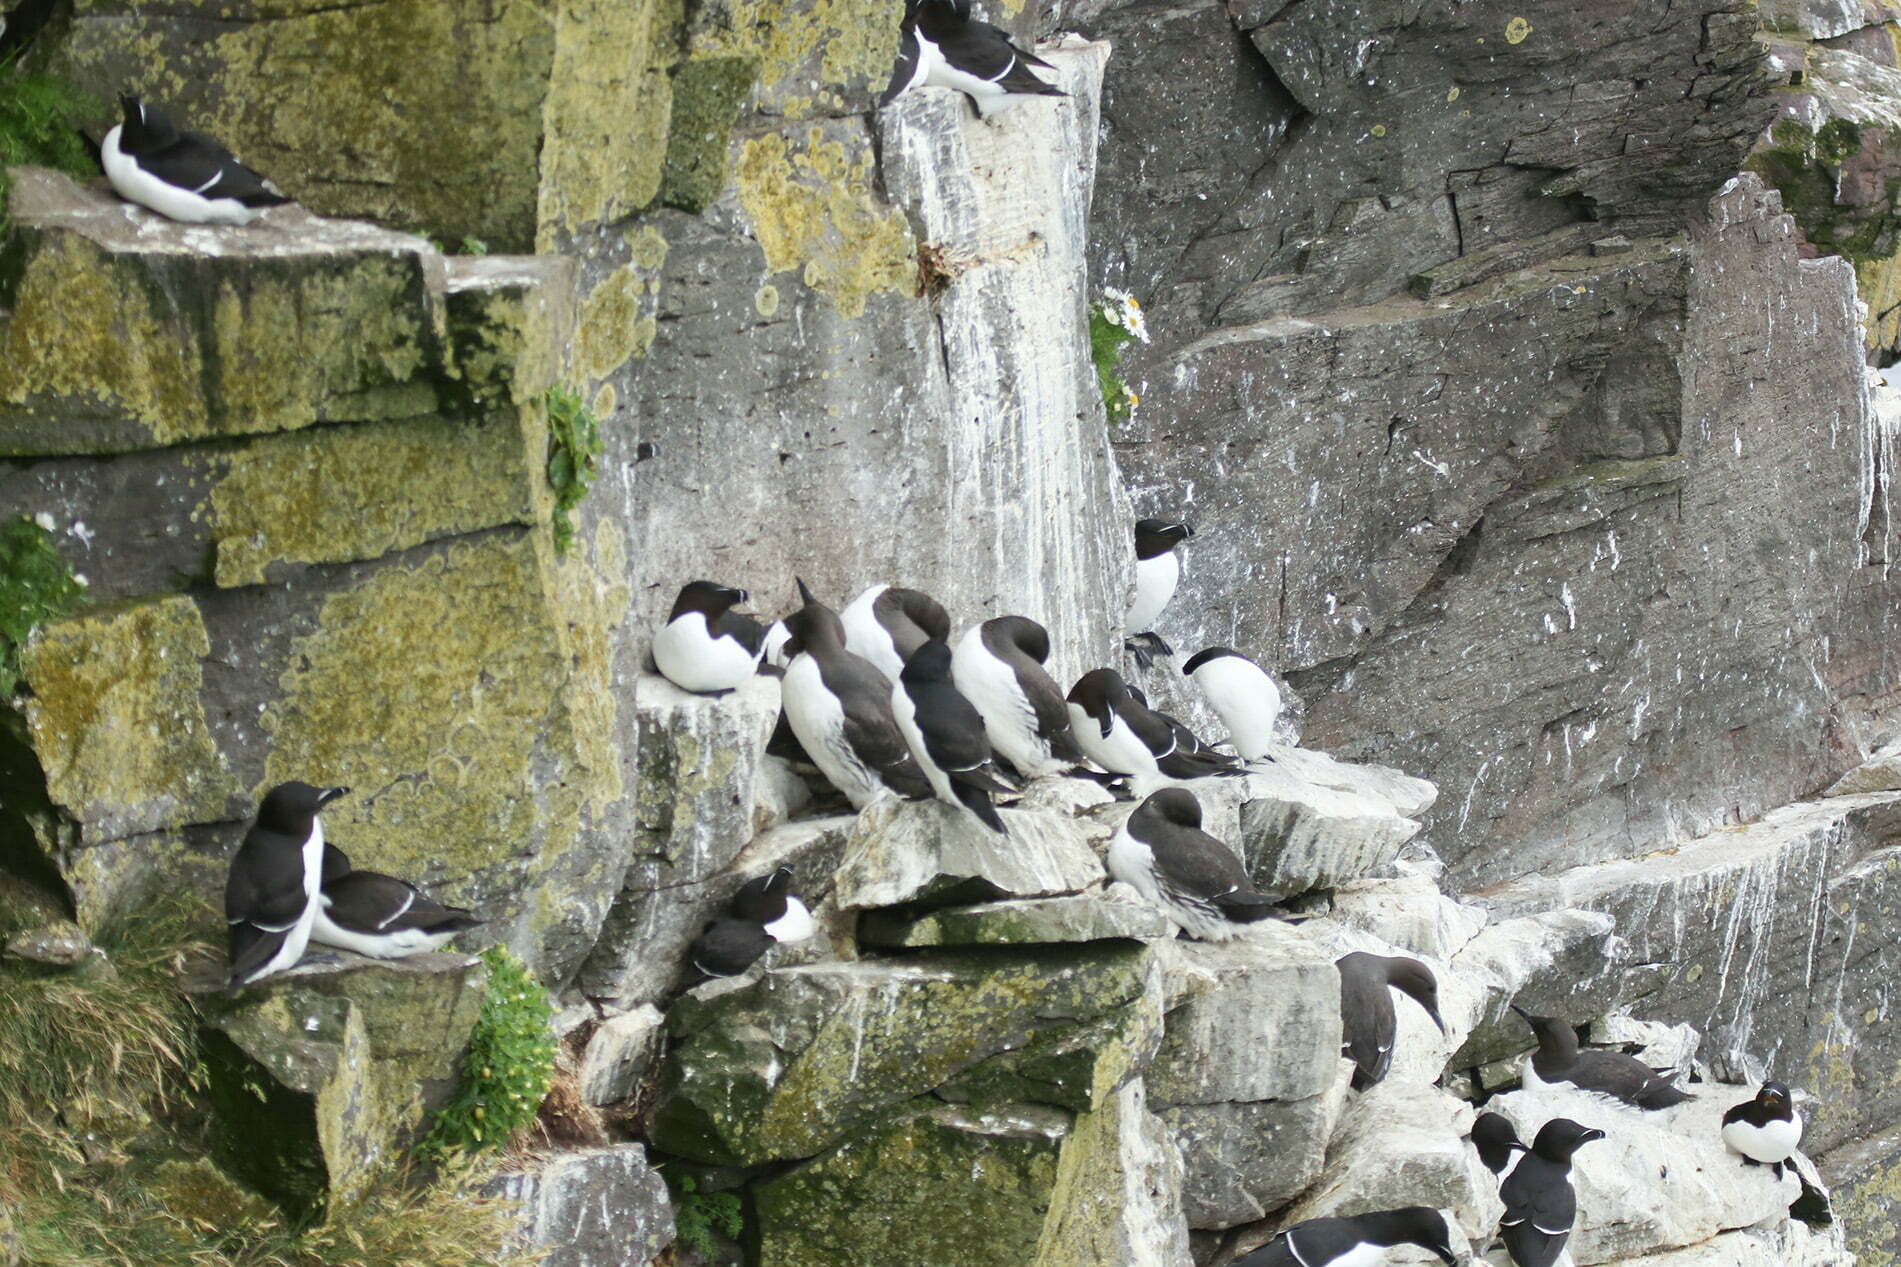 A group of guillemots bunching onto a cliff face.